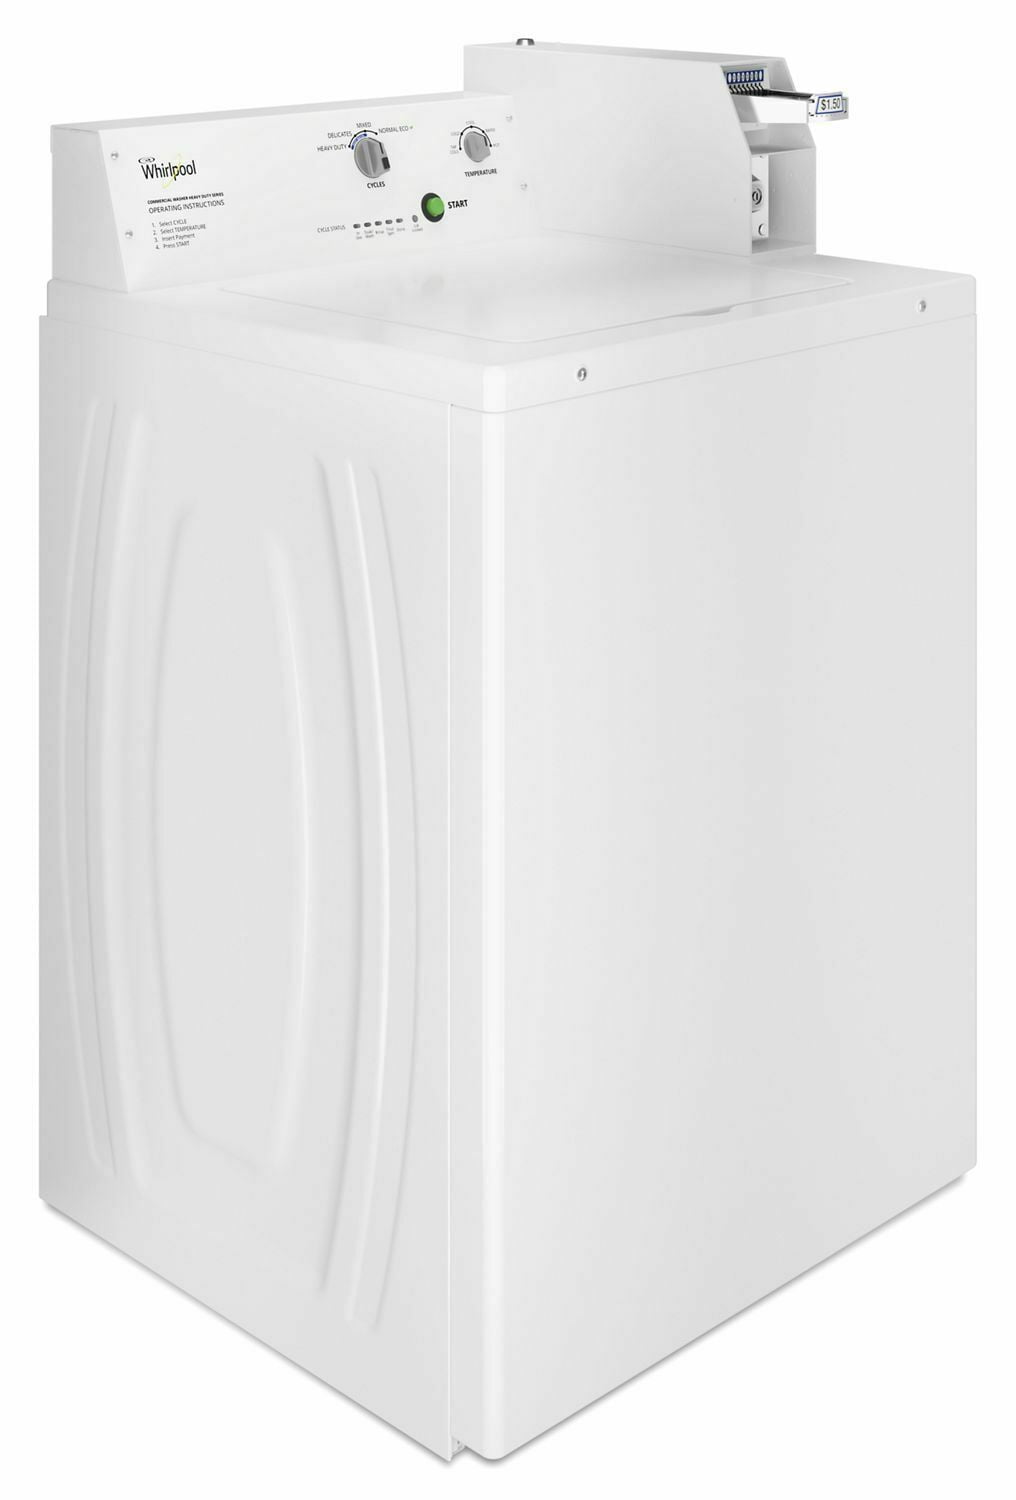 Whirlpool CAE2745FQ Commercial Top-Load Washer, Coin Equipped White